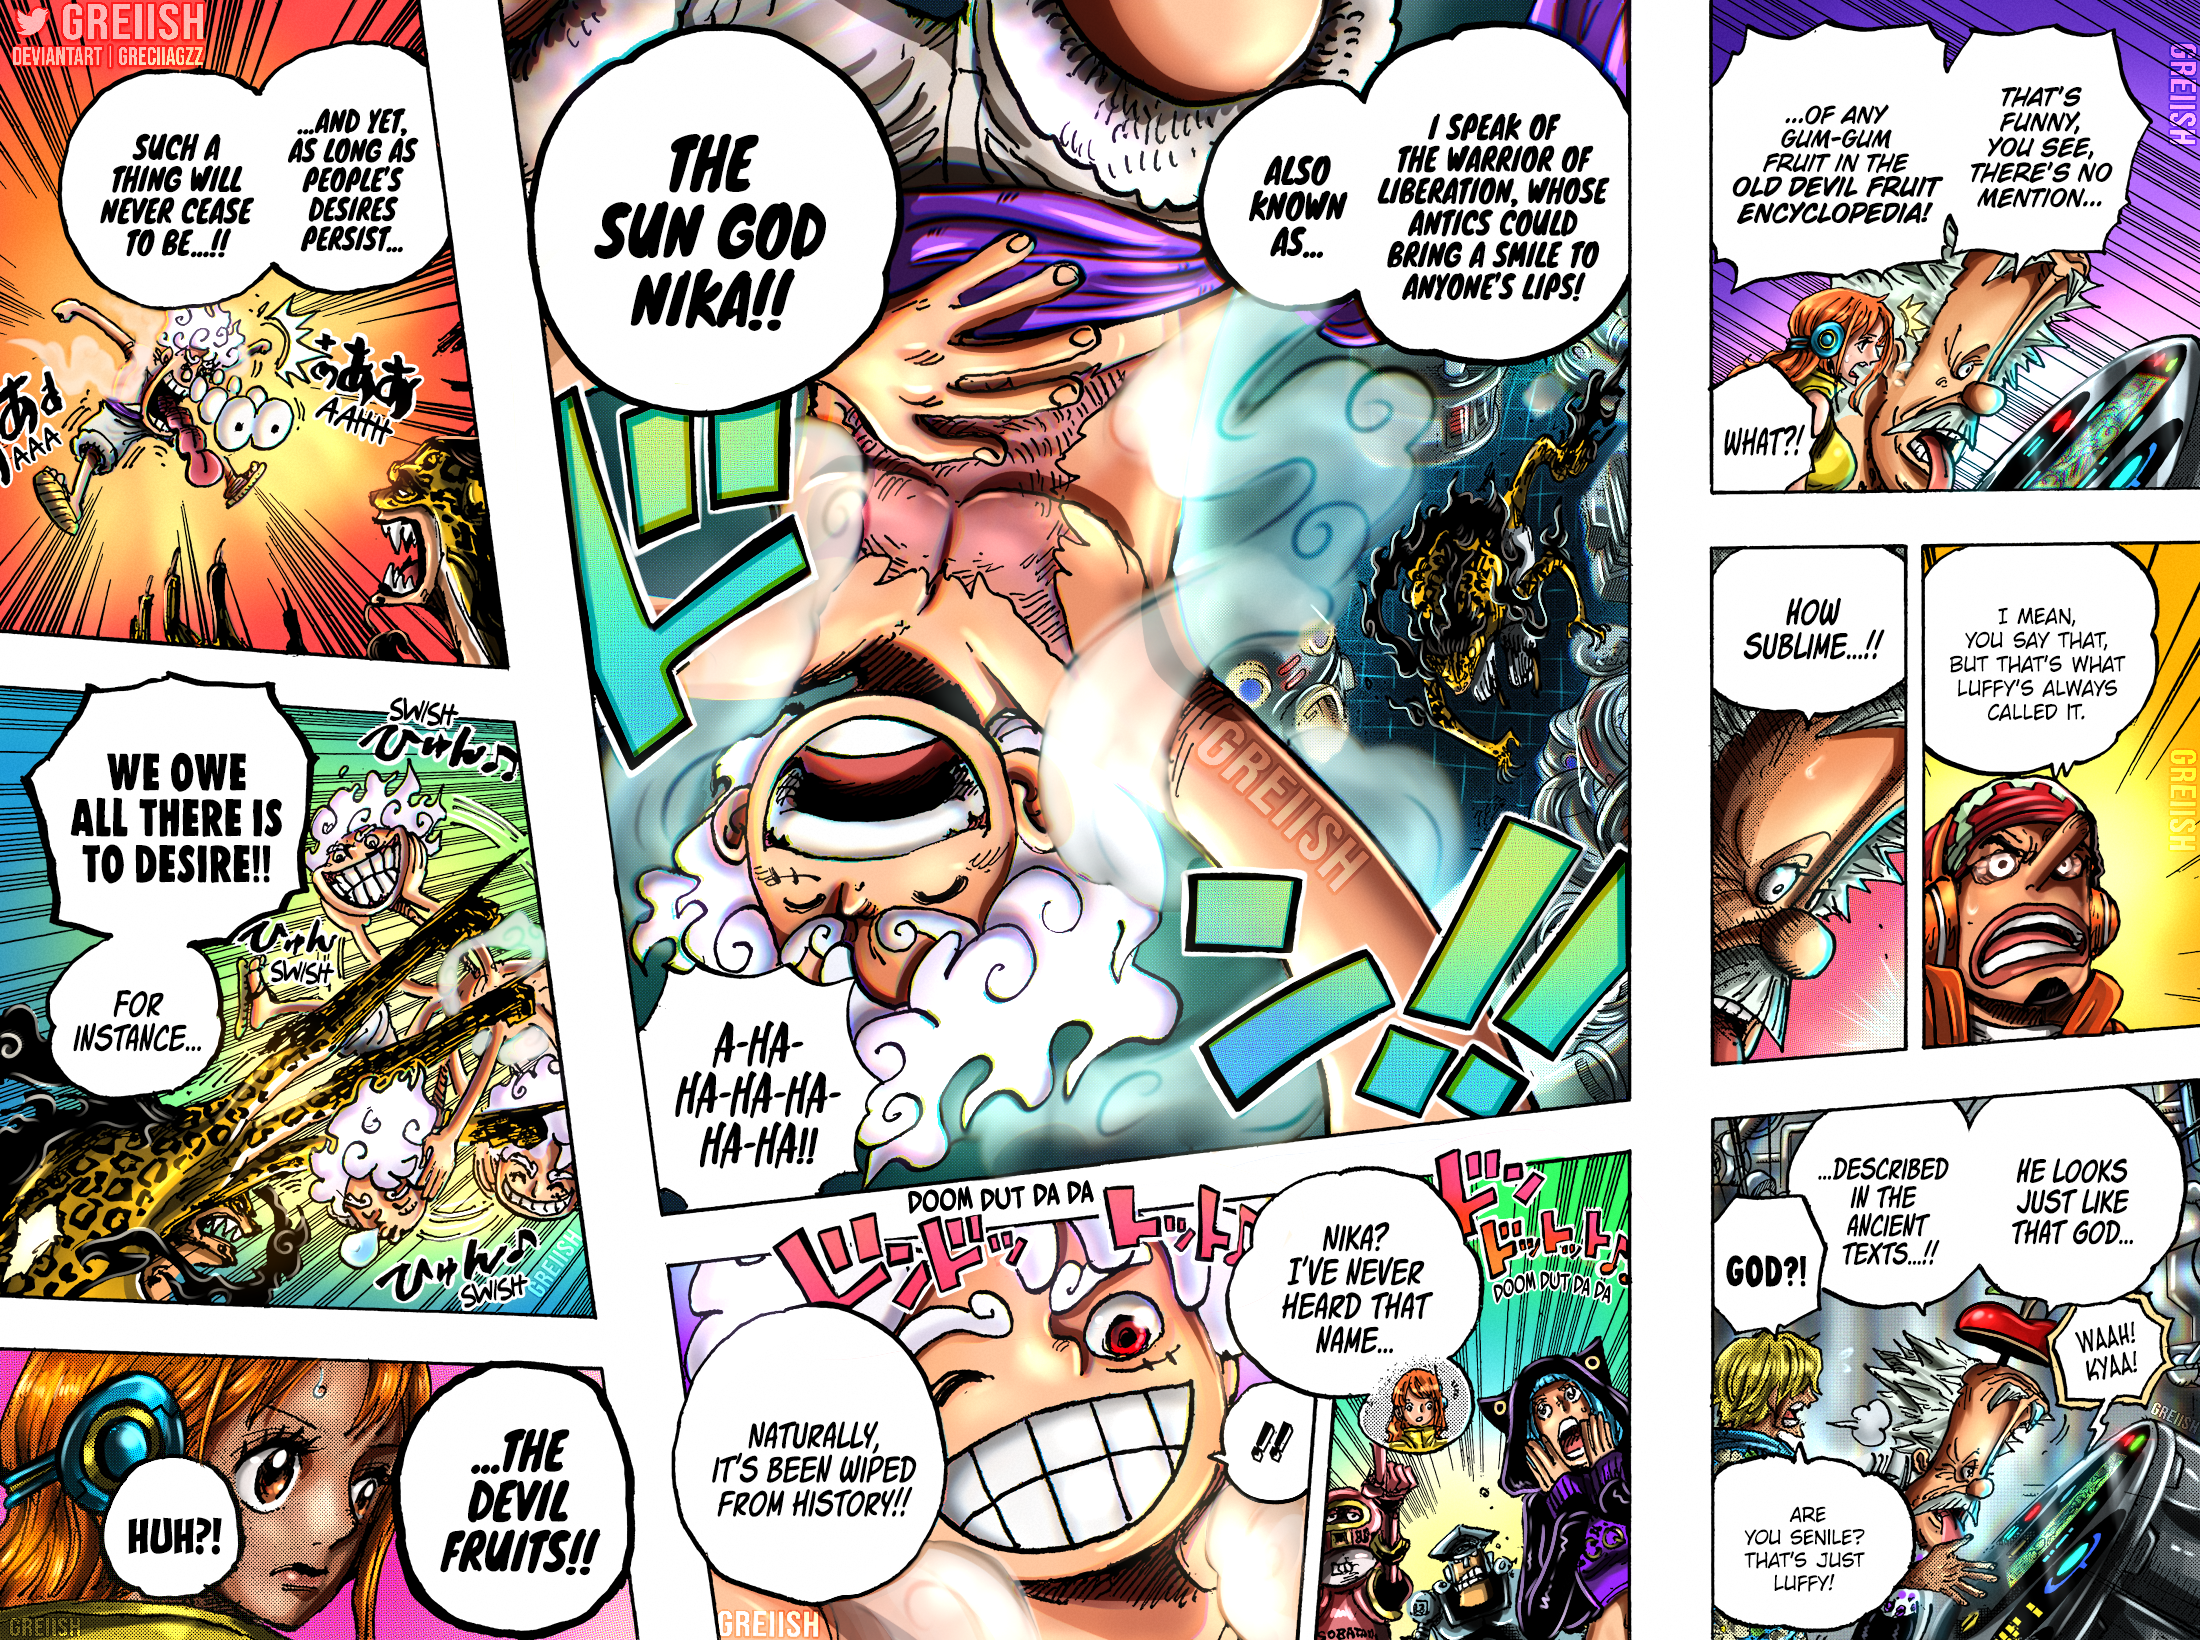 ONE PIECE Chapter 1057 colouring. ONE PIECE by Oda by badhri27 on